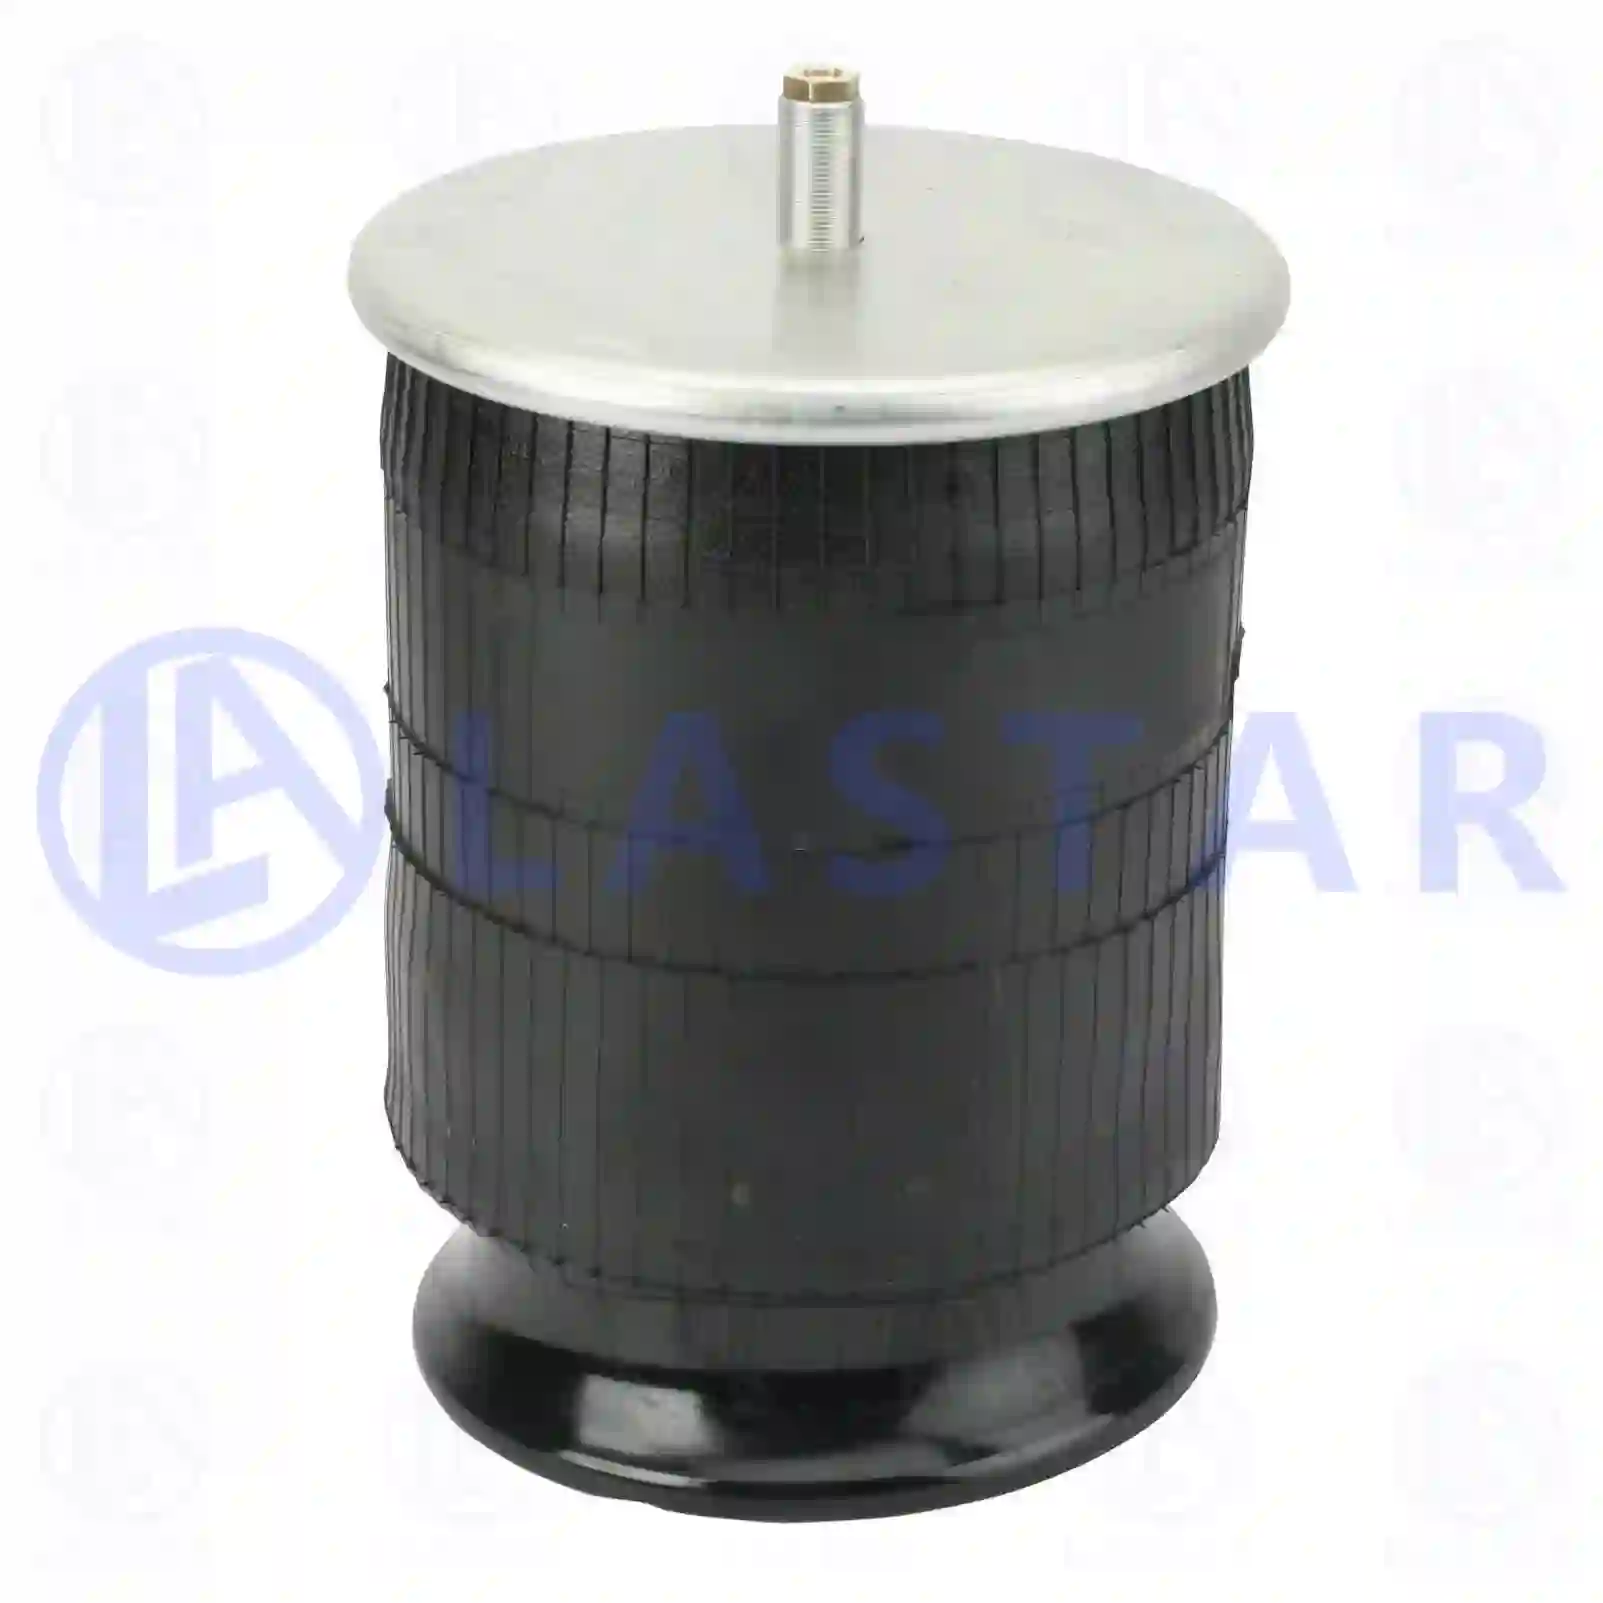 Air spring, with steel piston, 77728214, 9423205921, ZG40775-0008 ||  77728214 Lastar Spare Part | Truck Spare Parts, Auotomotive Spare Parts Air spring, with steel piston, 77728214, 9423205921, ZG40775-0008 ||  77728214 Lastar Spare Part | Truck Spare Parts, Auotomotive Spare Parts